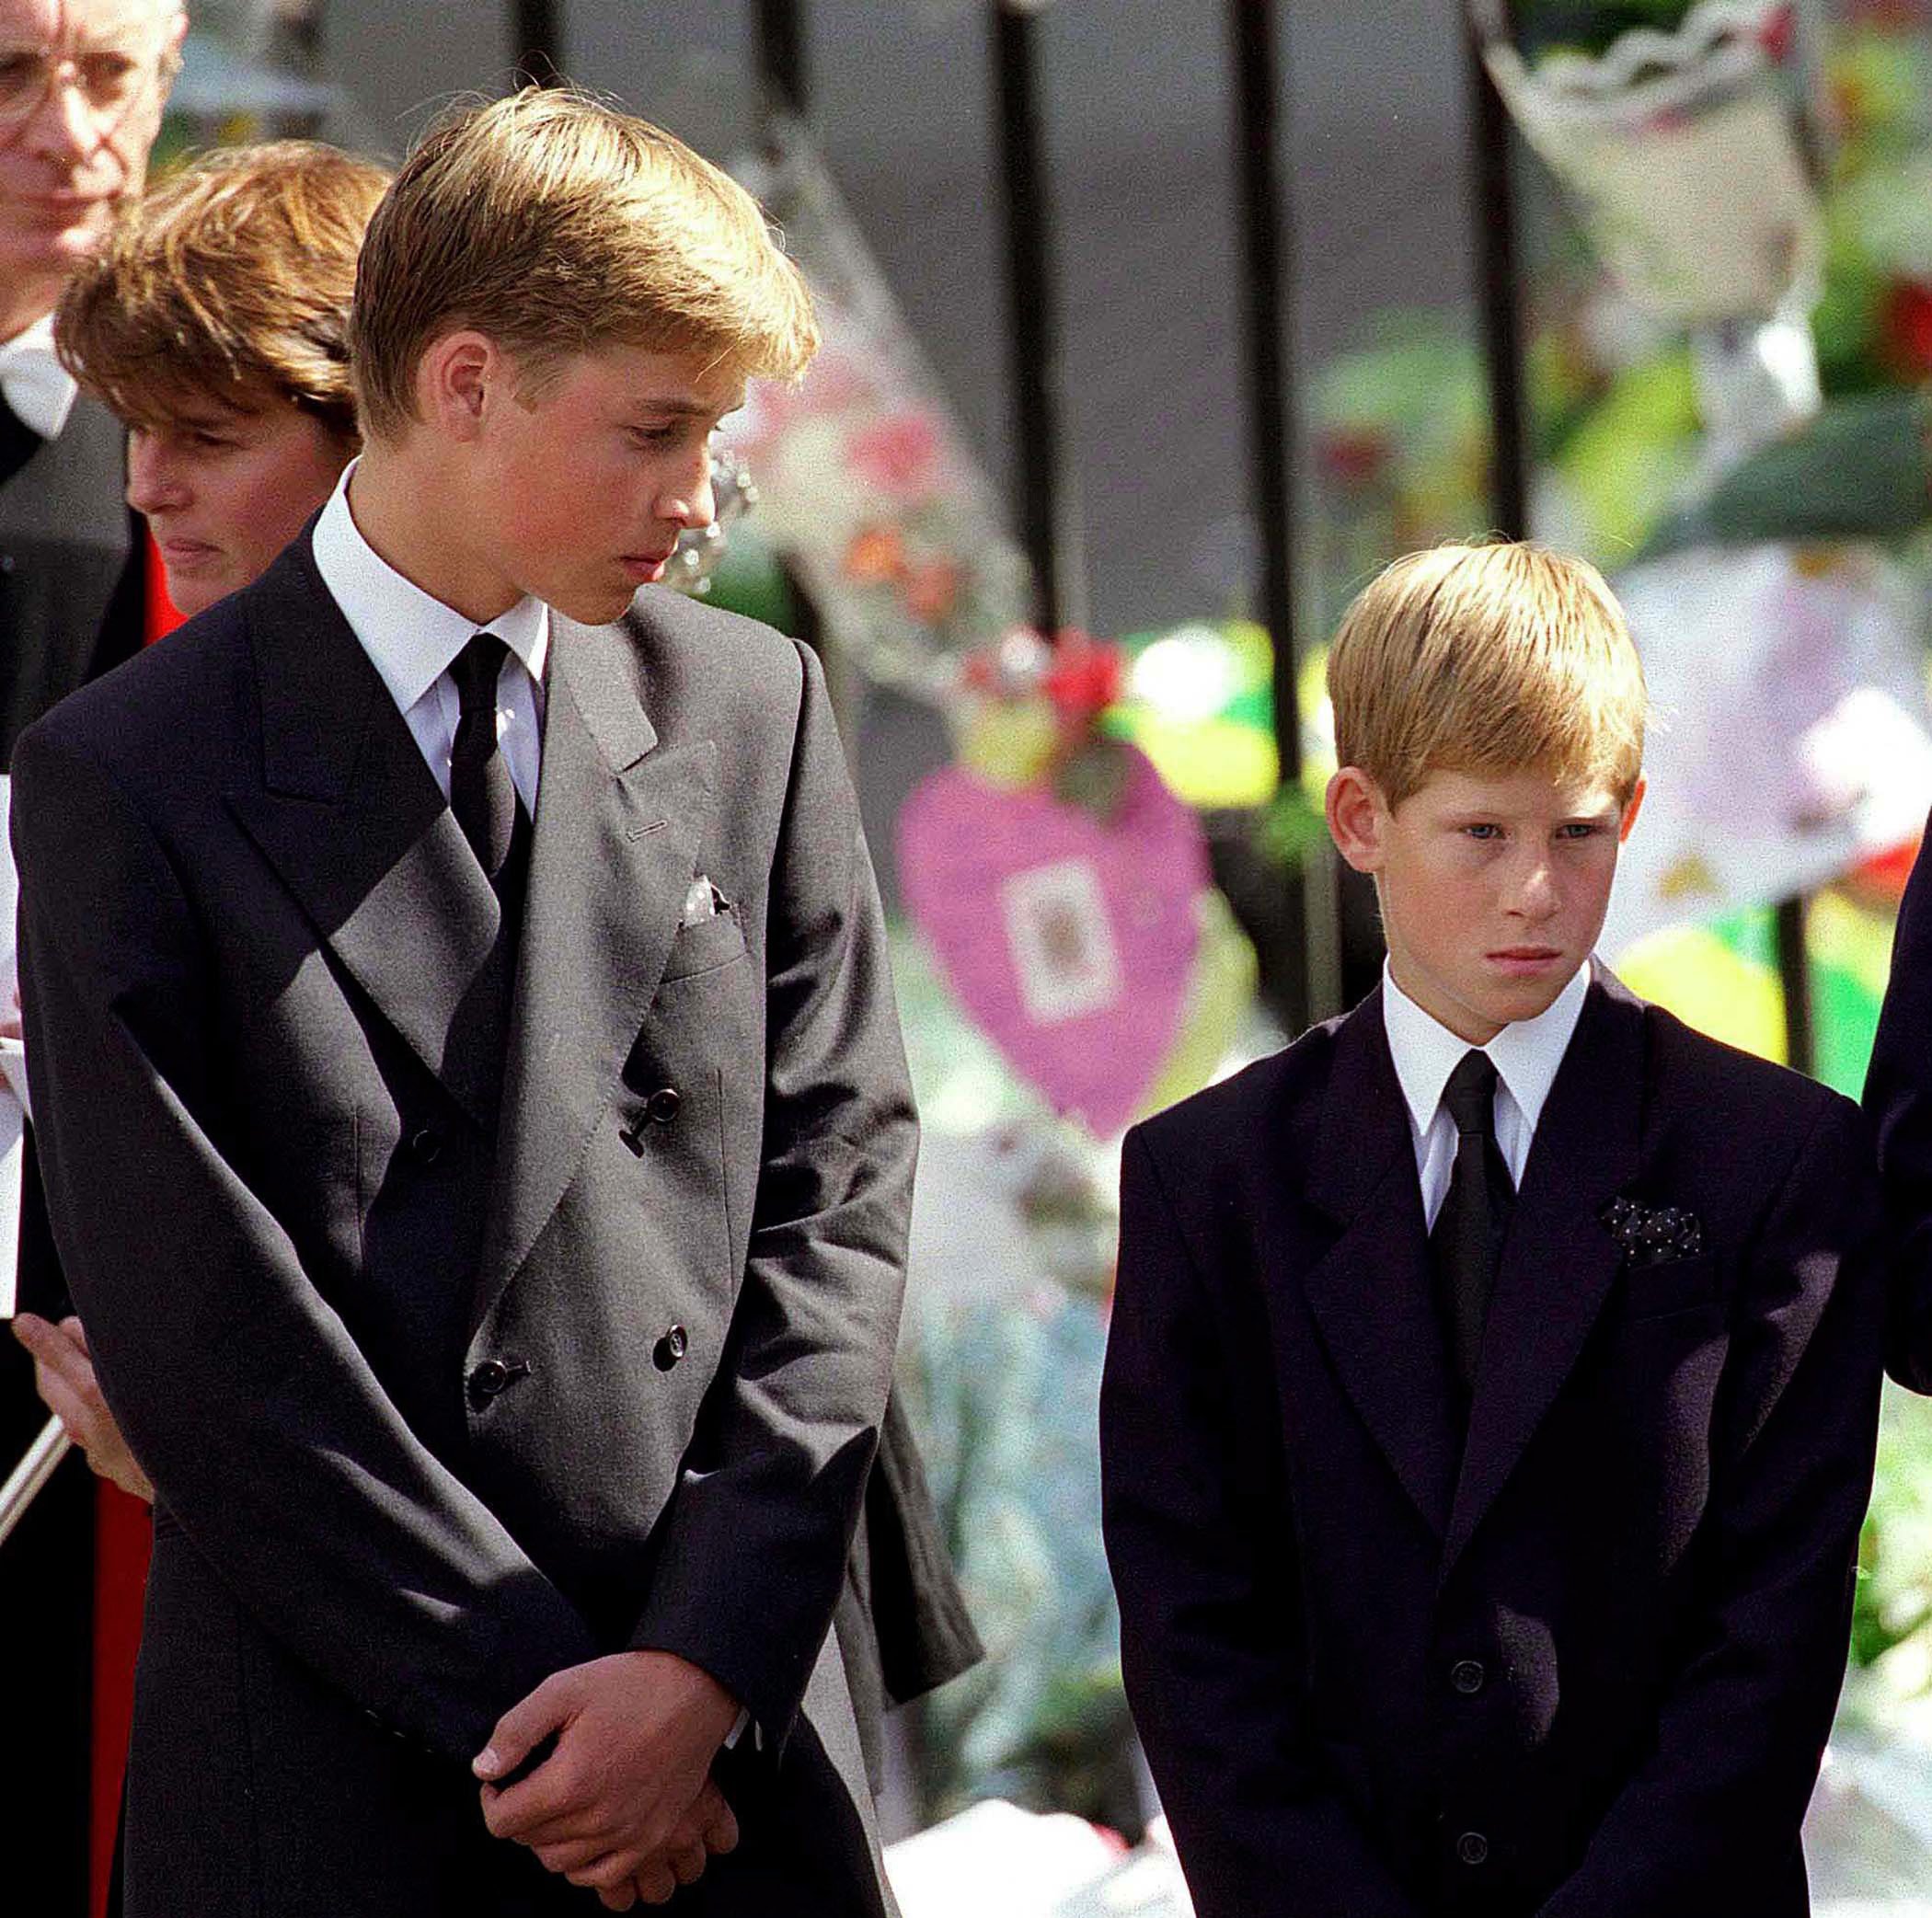 Prince William and Prince Harry stand outside Westminster Abbey at the funeral of Princess Diana on September 6, 1997, in London, England. | Source: Getty Images